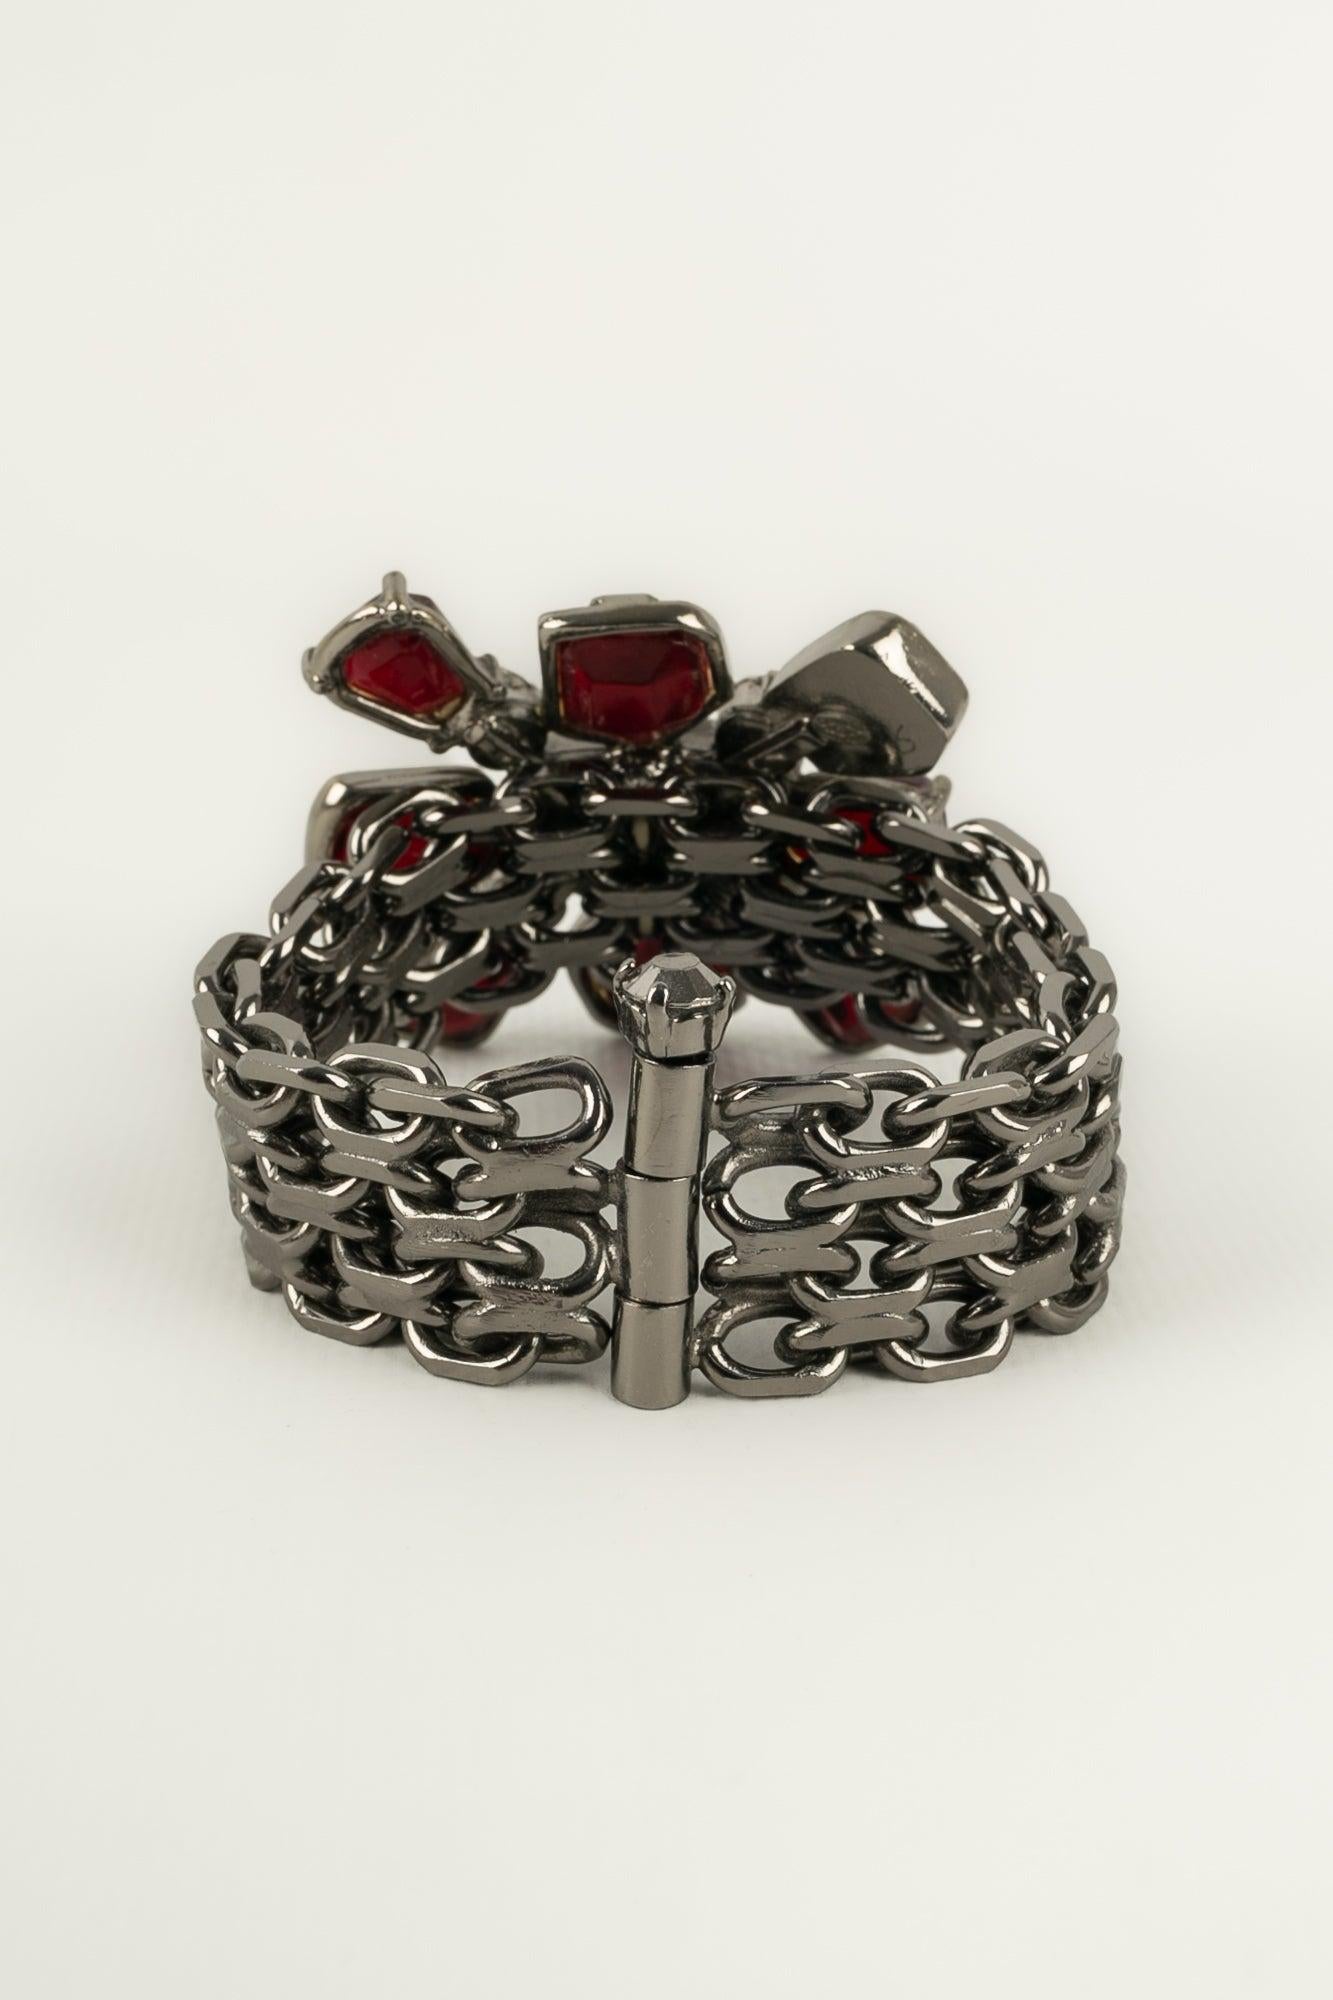 Chanel - (Made in France) Bracelet in dark silvery metal and burgundy rhinestones. Fall/Winter 2002 Collection. Jewelry engraved with the S of sales.

Additional information:
Condition: Very good condition
Dimensions: Length: 18.5 cm
Period: 21st